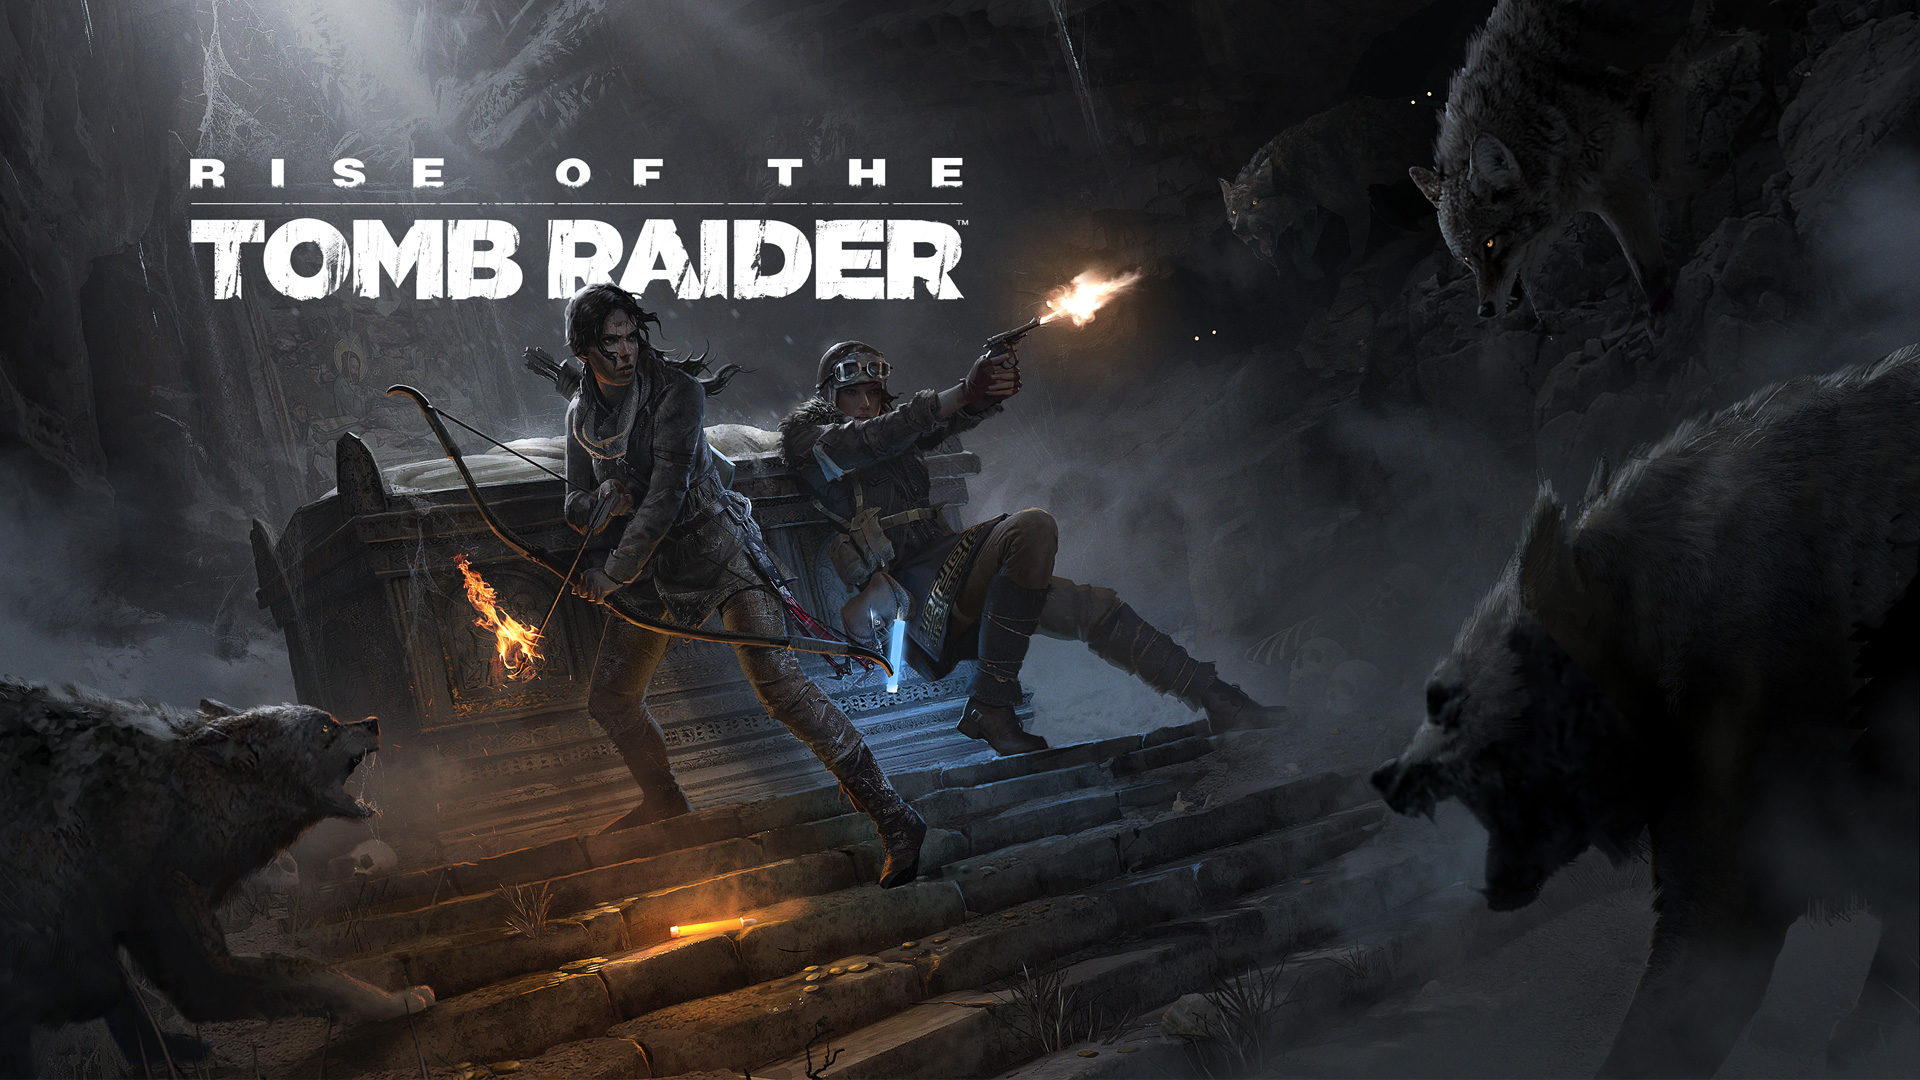 Rise Of The Tomb Raider Backgrounds, Compatible - PC, Mobile, Gadgets| 1920x1080 px